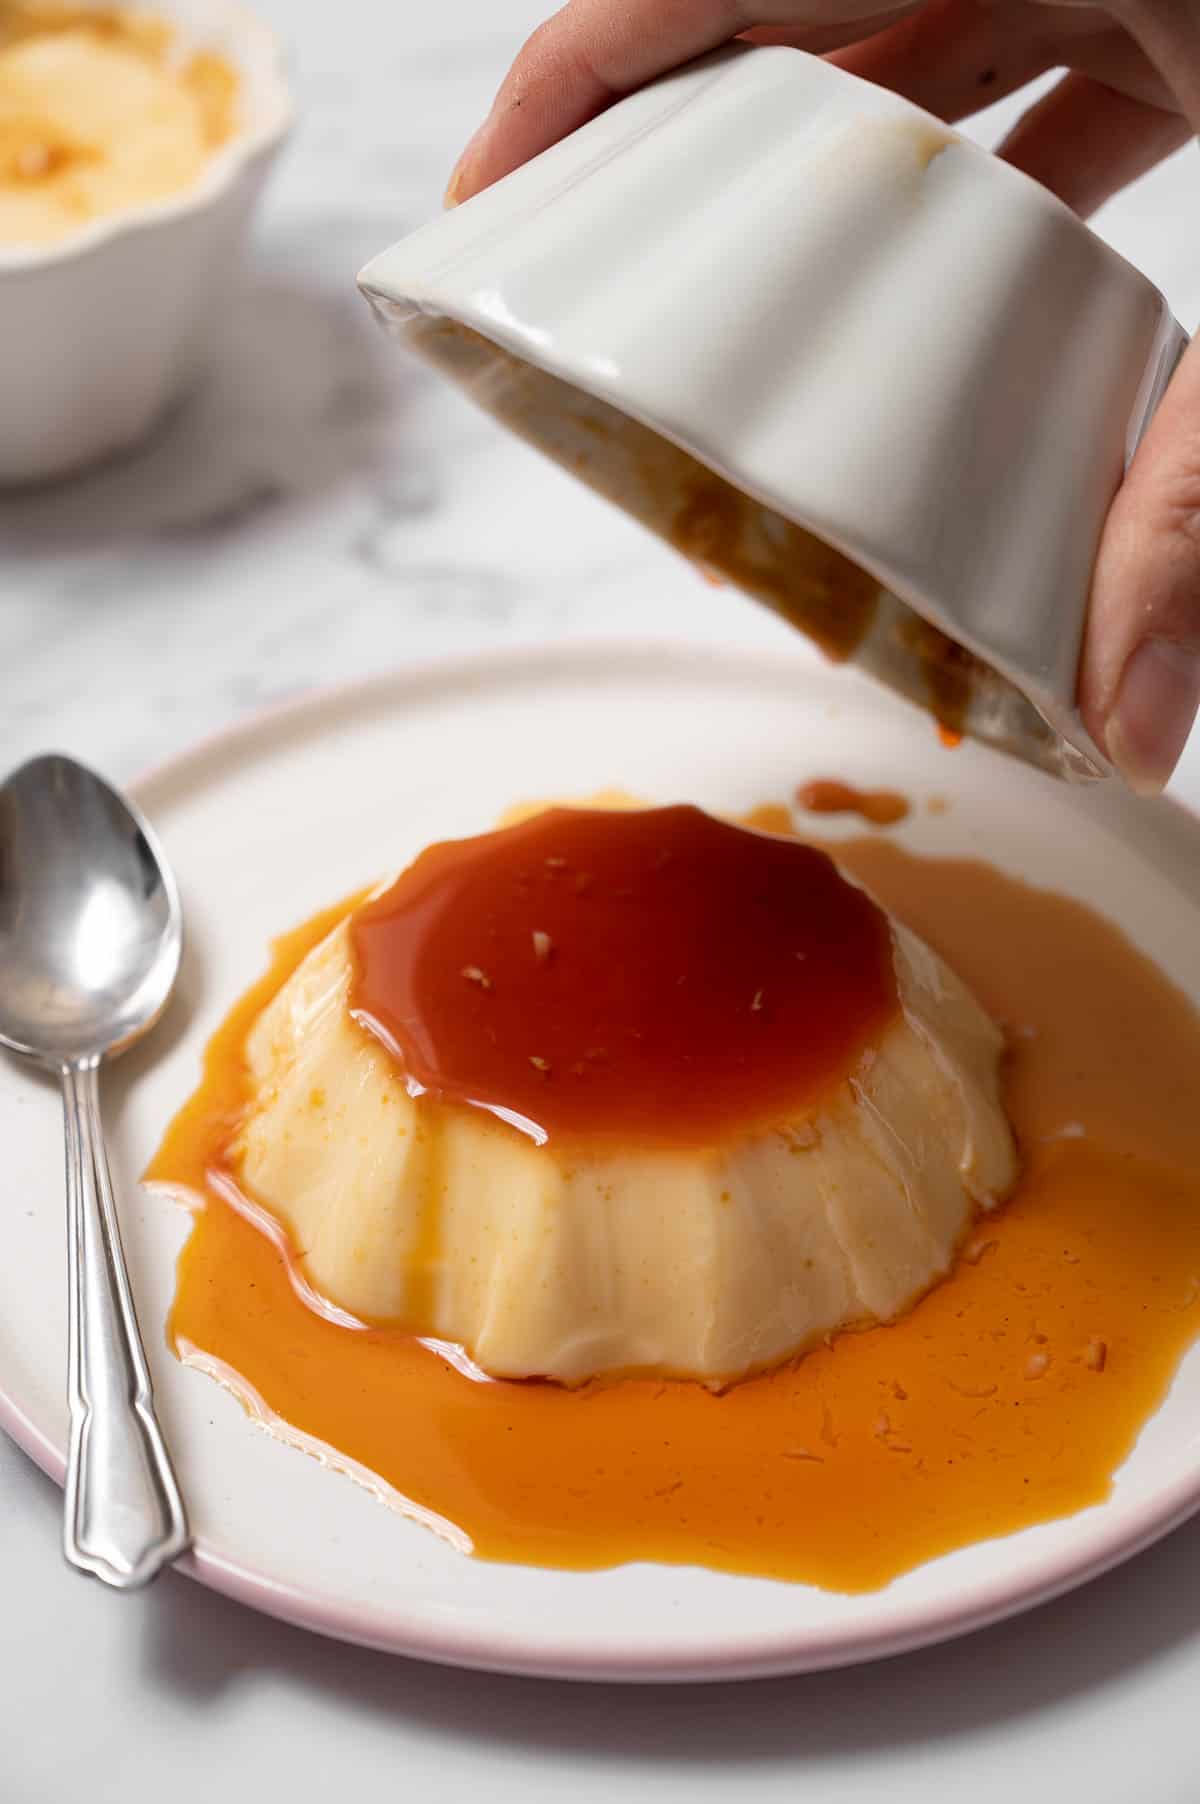 Spanish flan coming out of the mold onto a white plate.